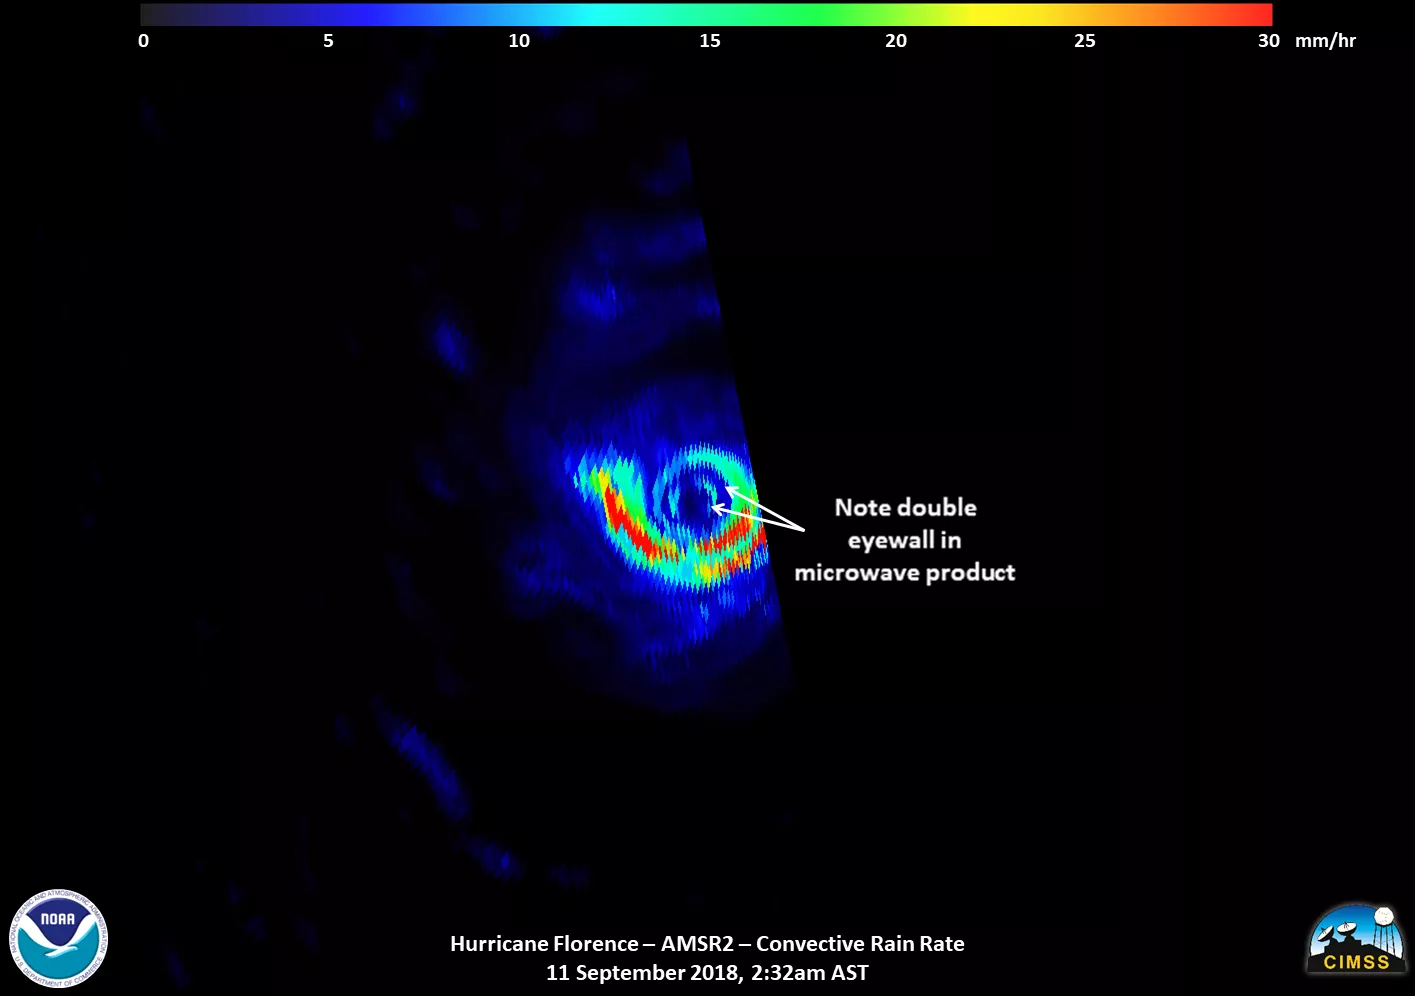 At 2:32 am EDT on Sept 11, the Advanced Microwave Scanning Radiometer 2, aboard the GCOM-W1 satellite, captured this image of Hurricane Florence. This image shows a double eyewall, an outer circle wrapped around an inner circle. Image credit: NOAA/UWM-SSEC-CIMSS/William Straka III